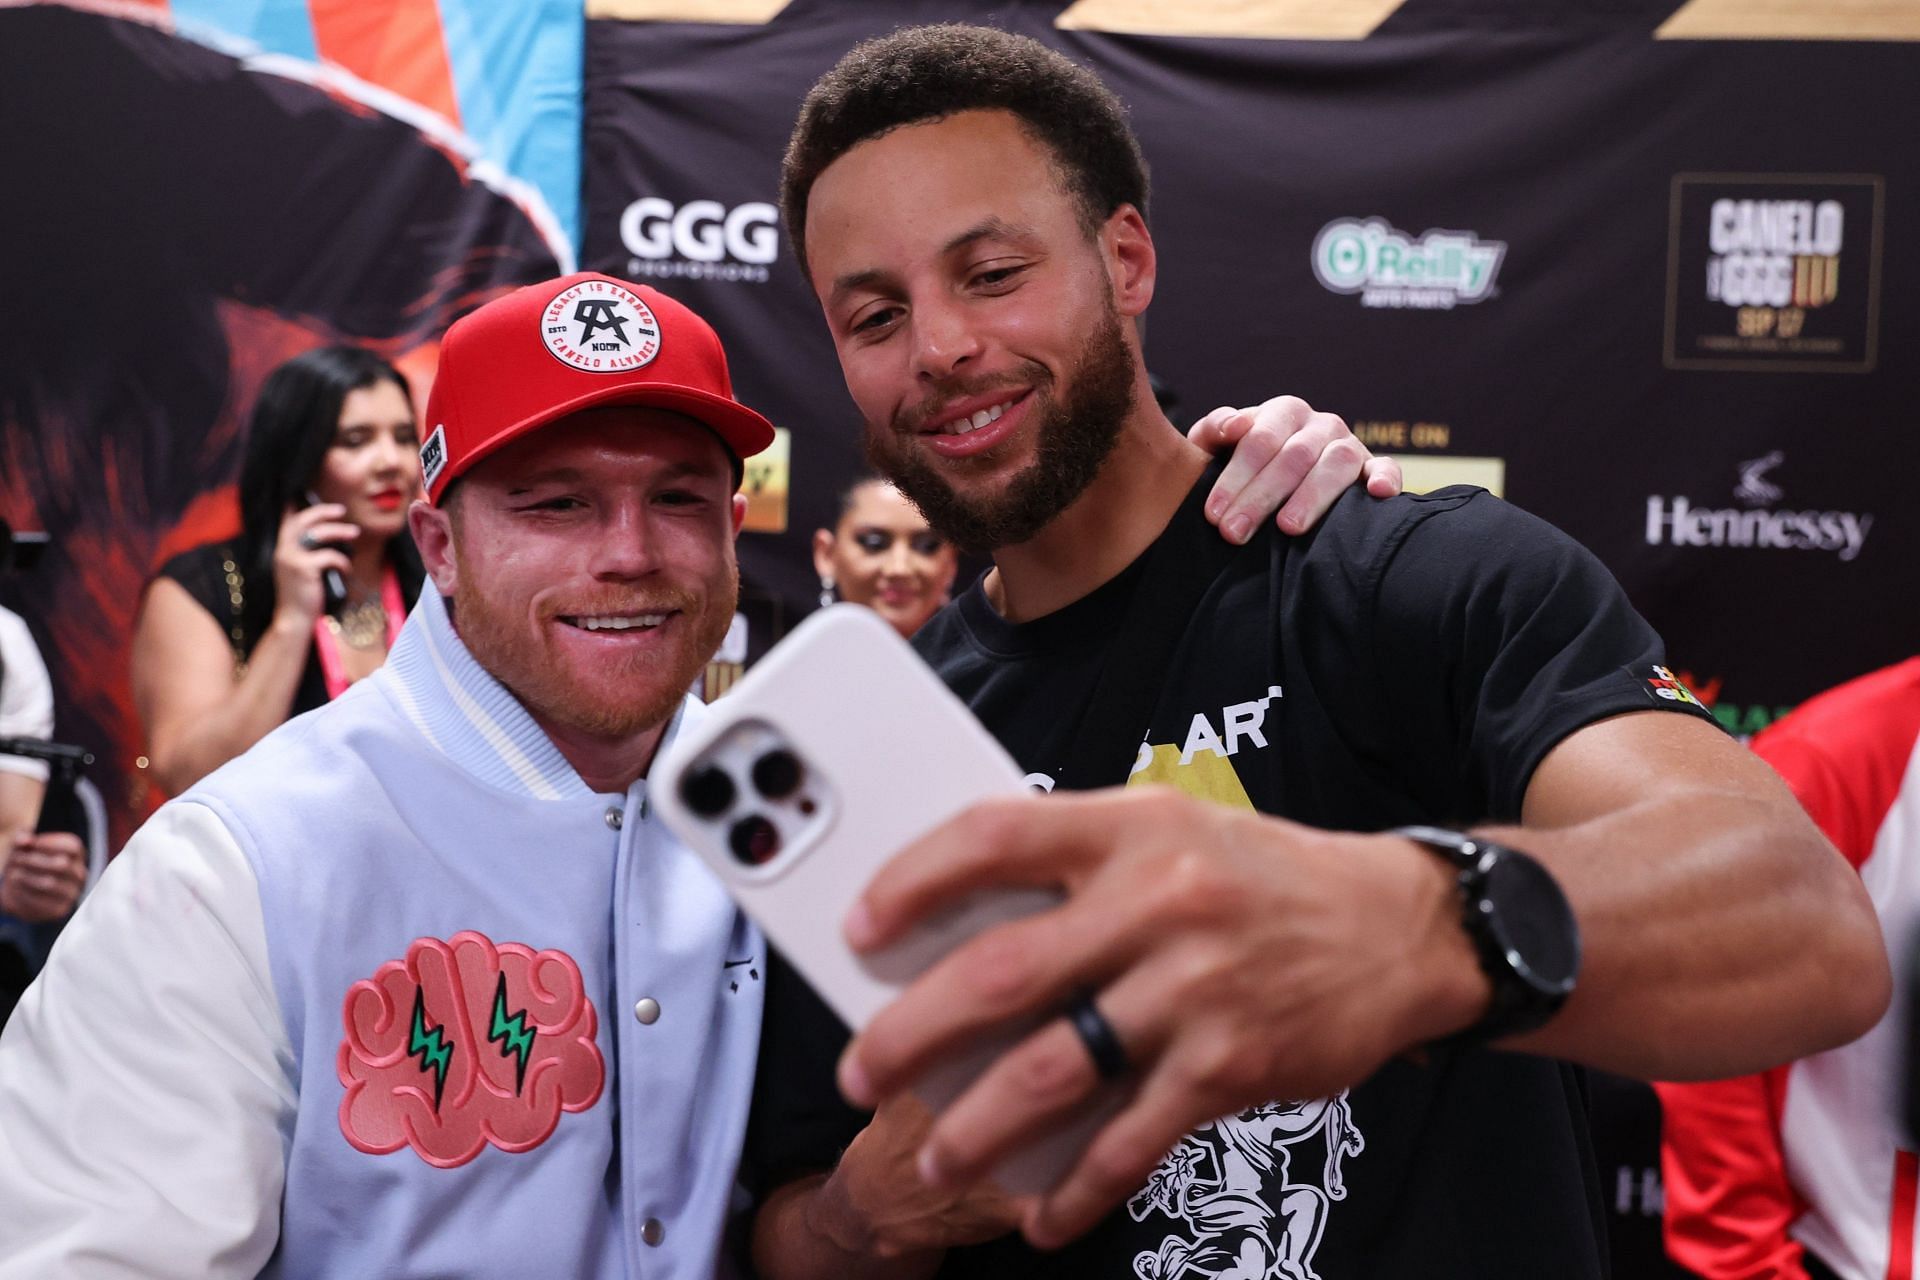 Canelo Alvarez (left) and Stephen Curry (right). (Photo from Matchroom Boxing)